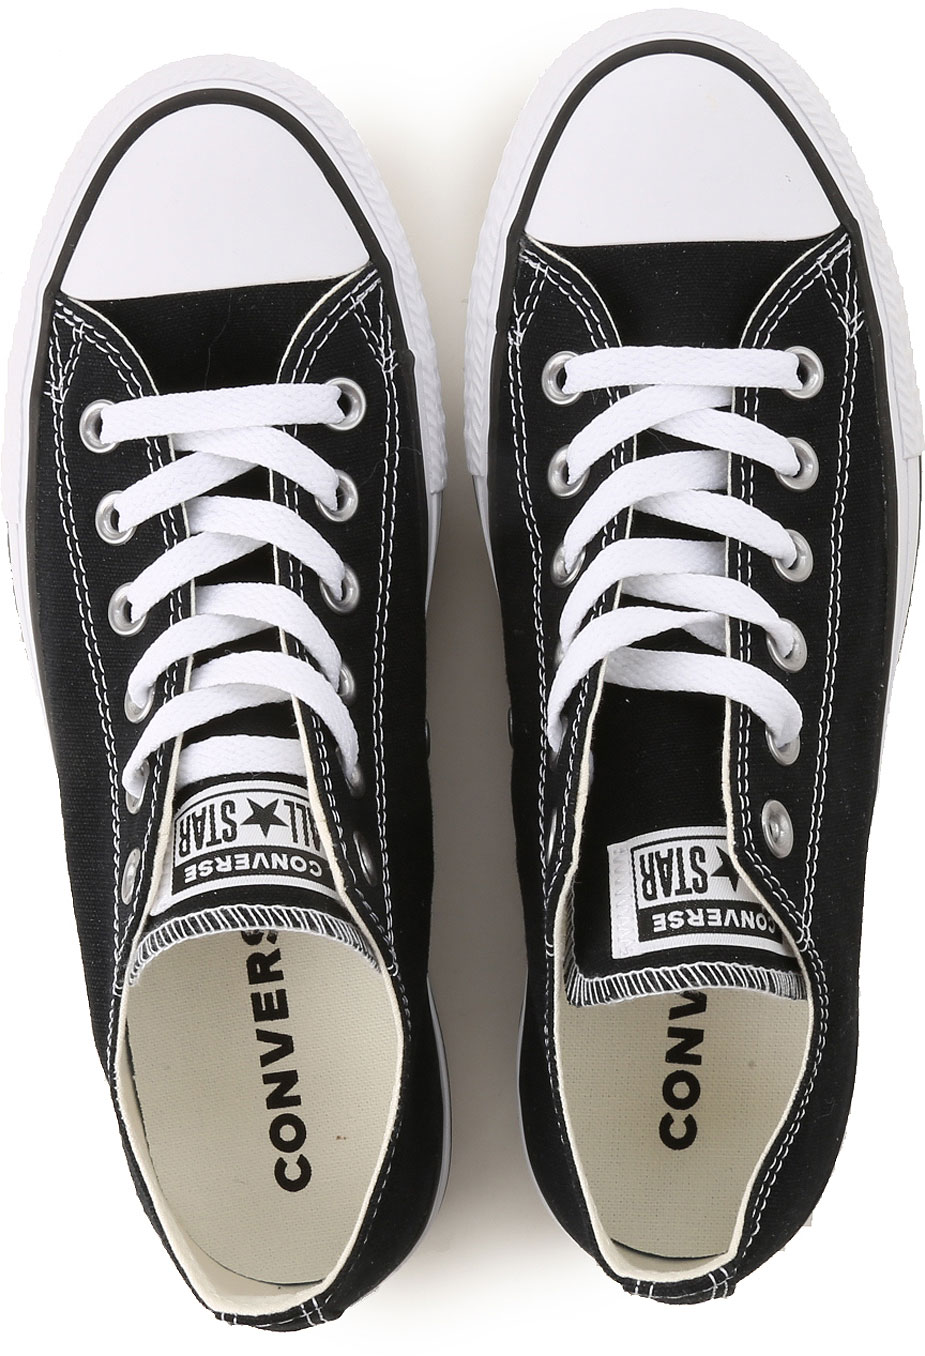 Womens Shoes Converse, Style code: 563970c-034-